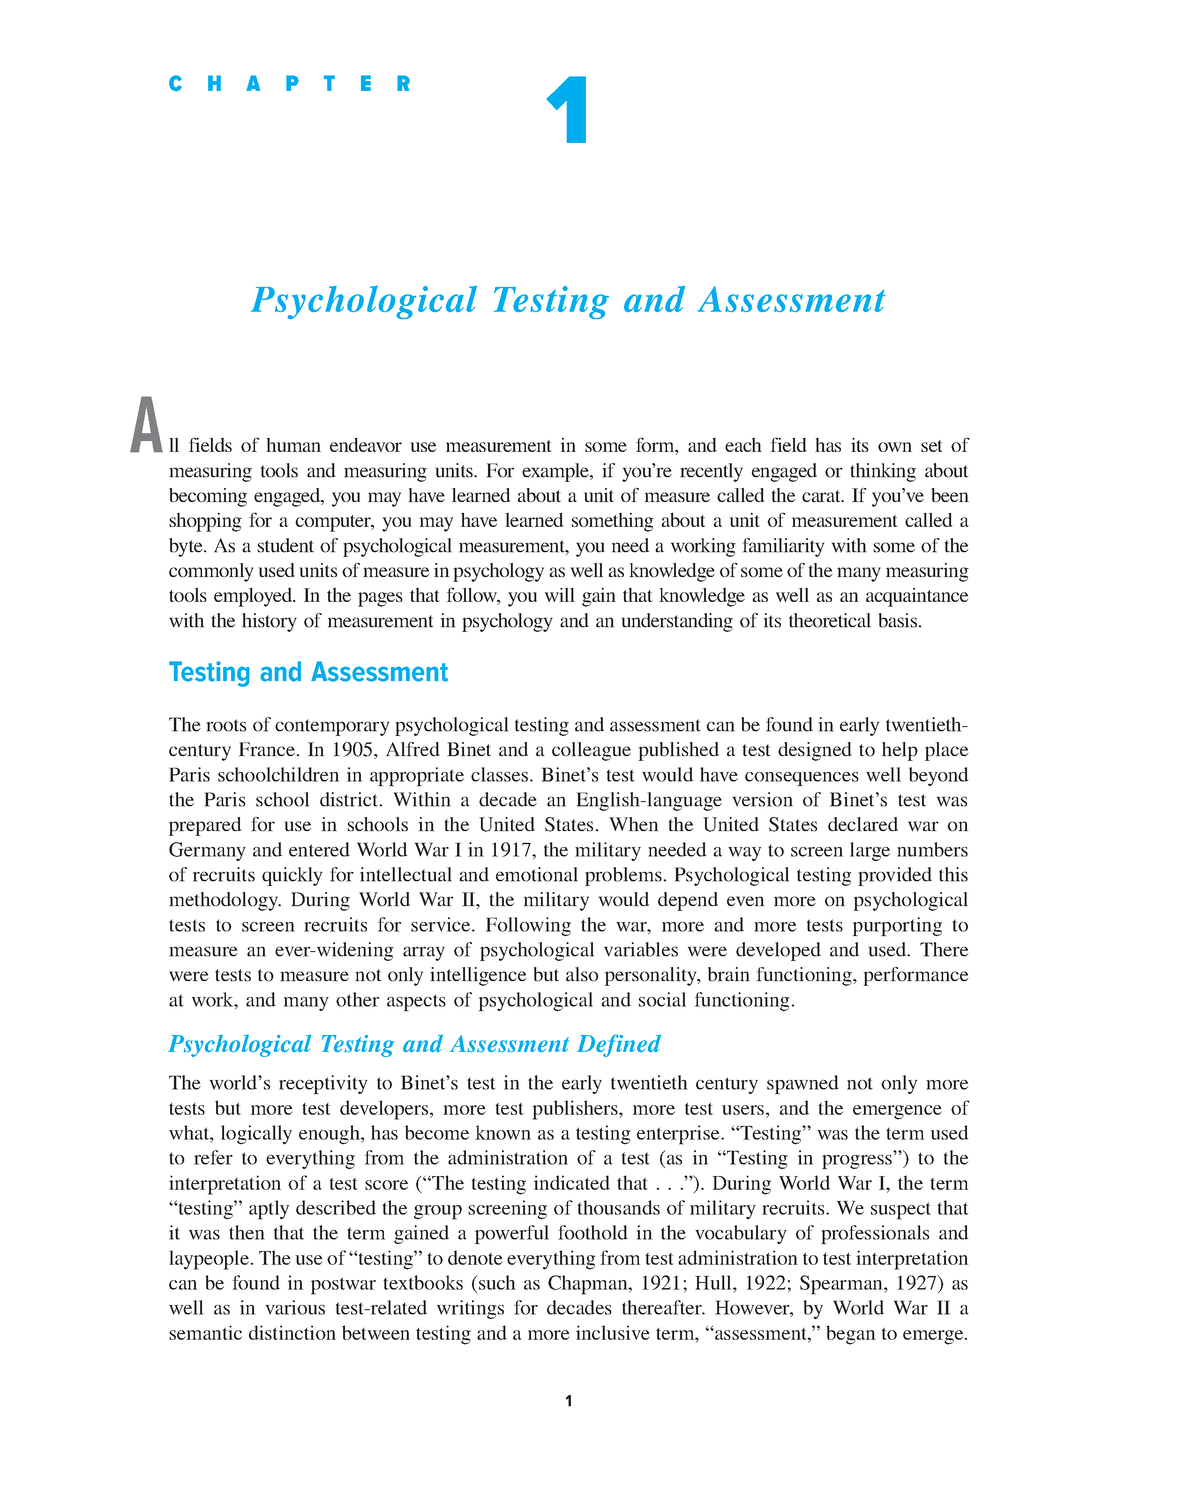 Psychological Testing and Assessment: An Introduction to Tests and